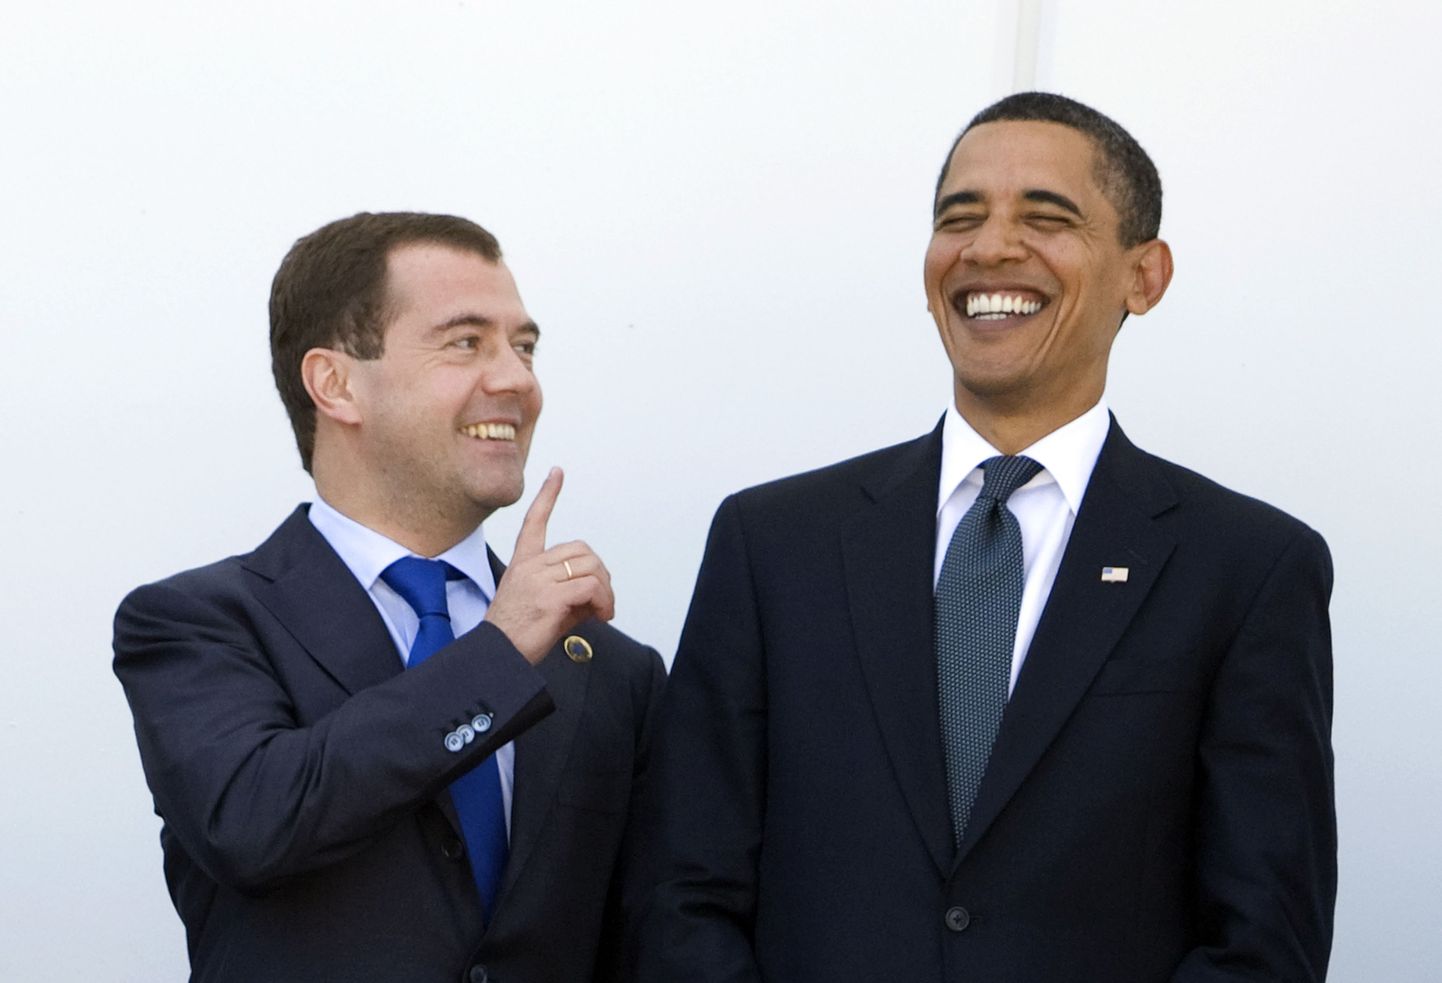 U.S. President Barack Obama (R) and Russia's President Dmitry Medvedev smile during a family photo at the G8 summit in L'Aquila, Italy July 10, 2009. After two days of talks focused on the economic crisis, trade and global warming, the final day of the G8 gathering in Italy looked at the problems facing the poorest nations. REUTERS/Tony Gentile  (ITALY POLITICS)